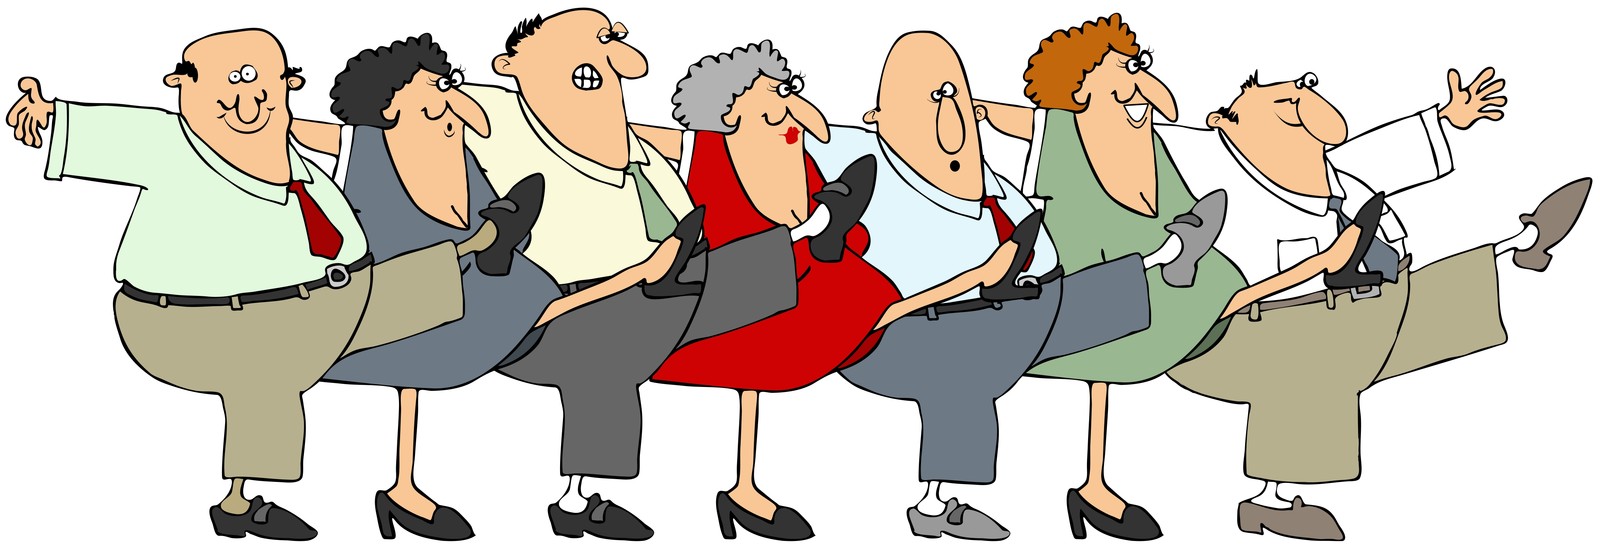 Free Elderly Exercising Cliparts, Download Free Clip Art